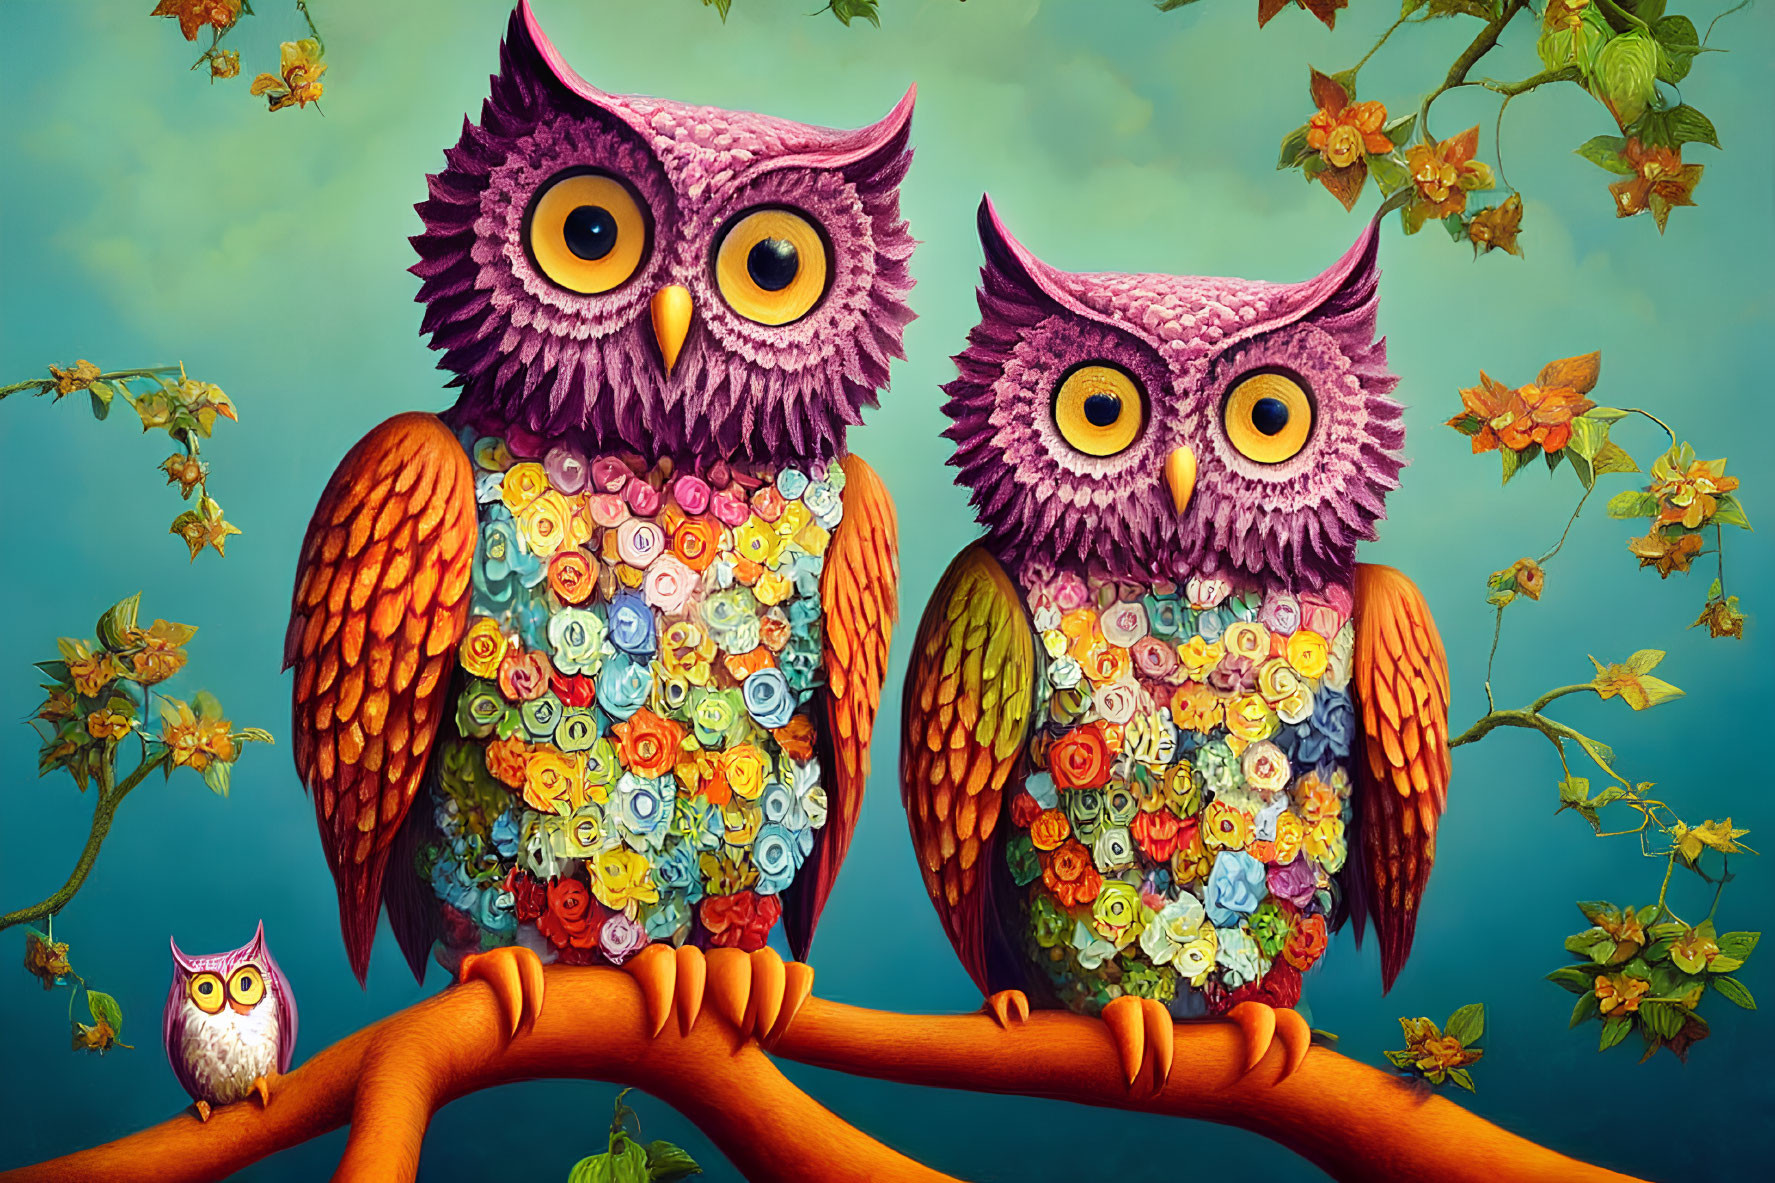 Colorful Stylized Owls on Branch with Floral Patterns in Blue Setting